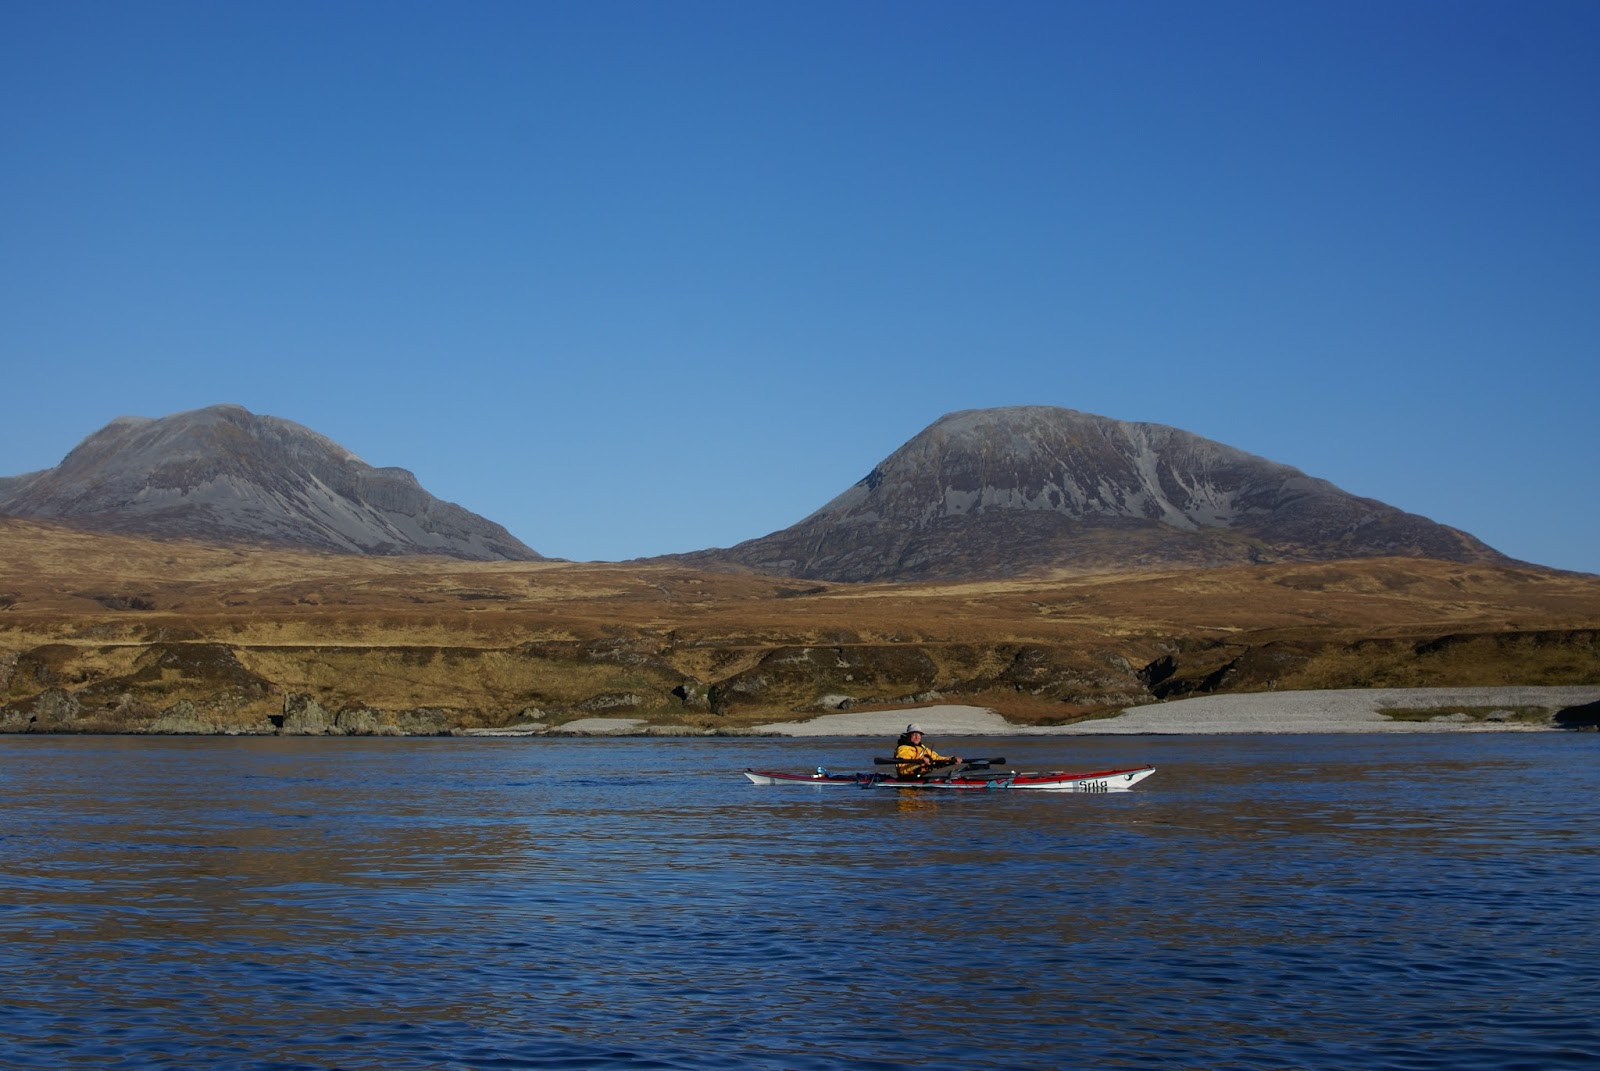 Mountain and Sea Scotland: An evening out on the Sound of Islay